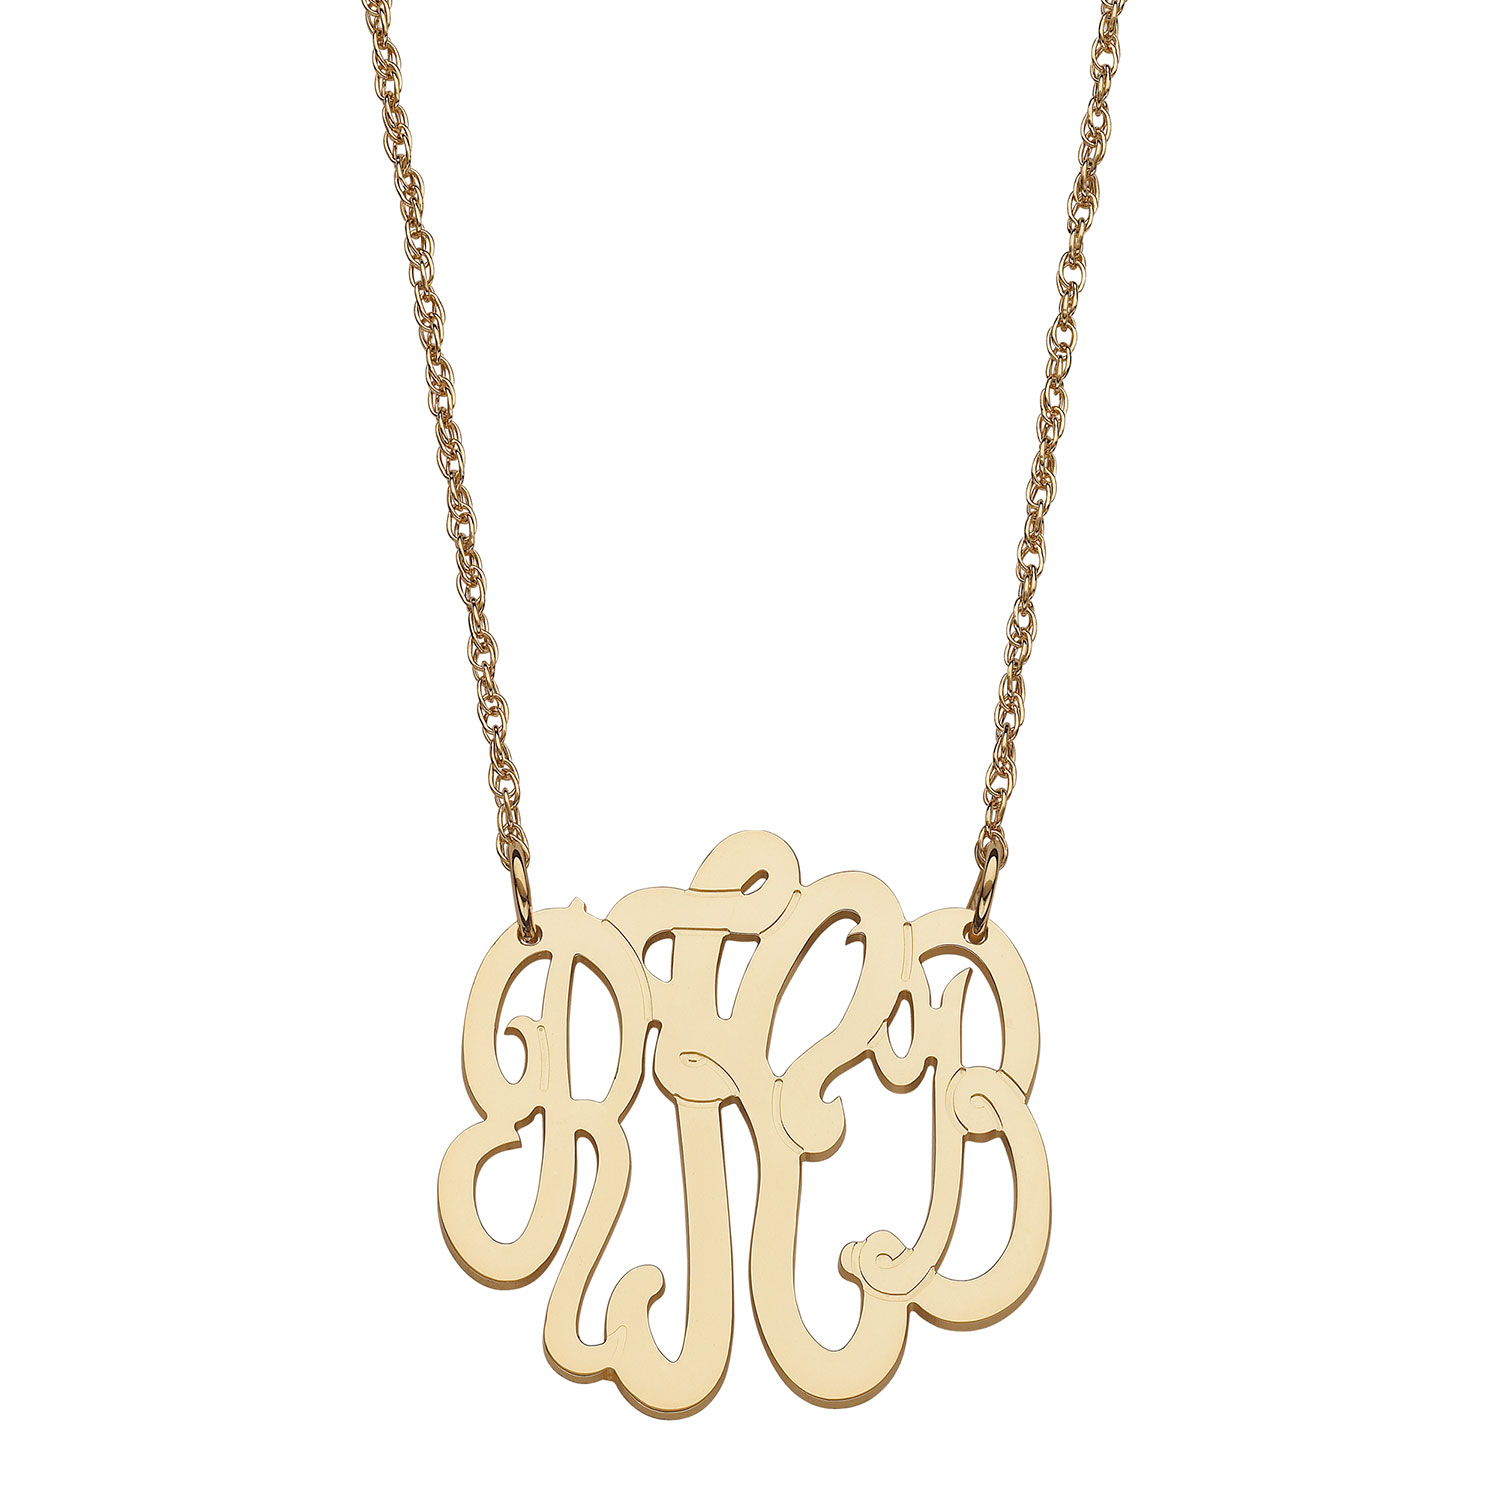 14K Yellow Gold 3 Initial Monogram Necklace - Small - 24941 | Limoges Jewelry